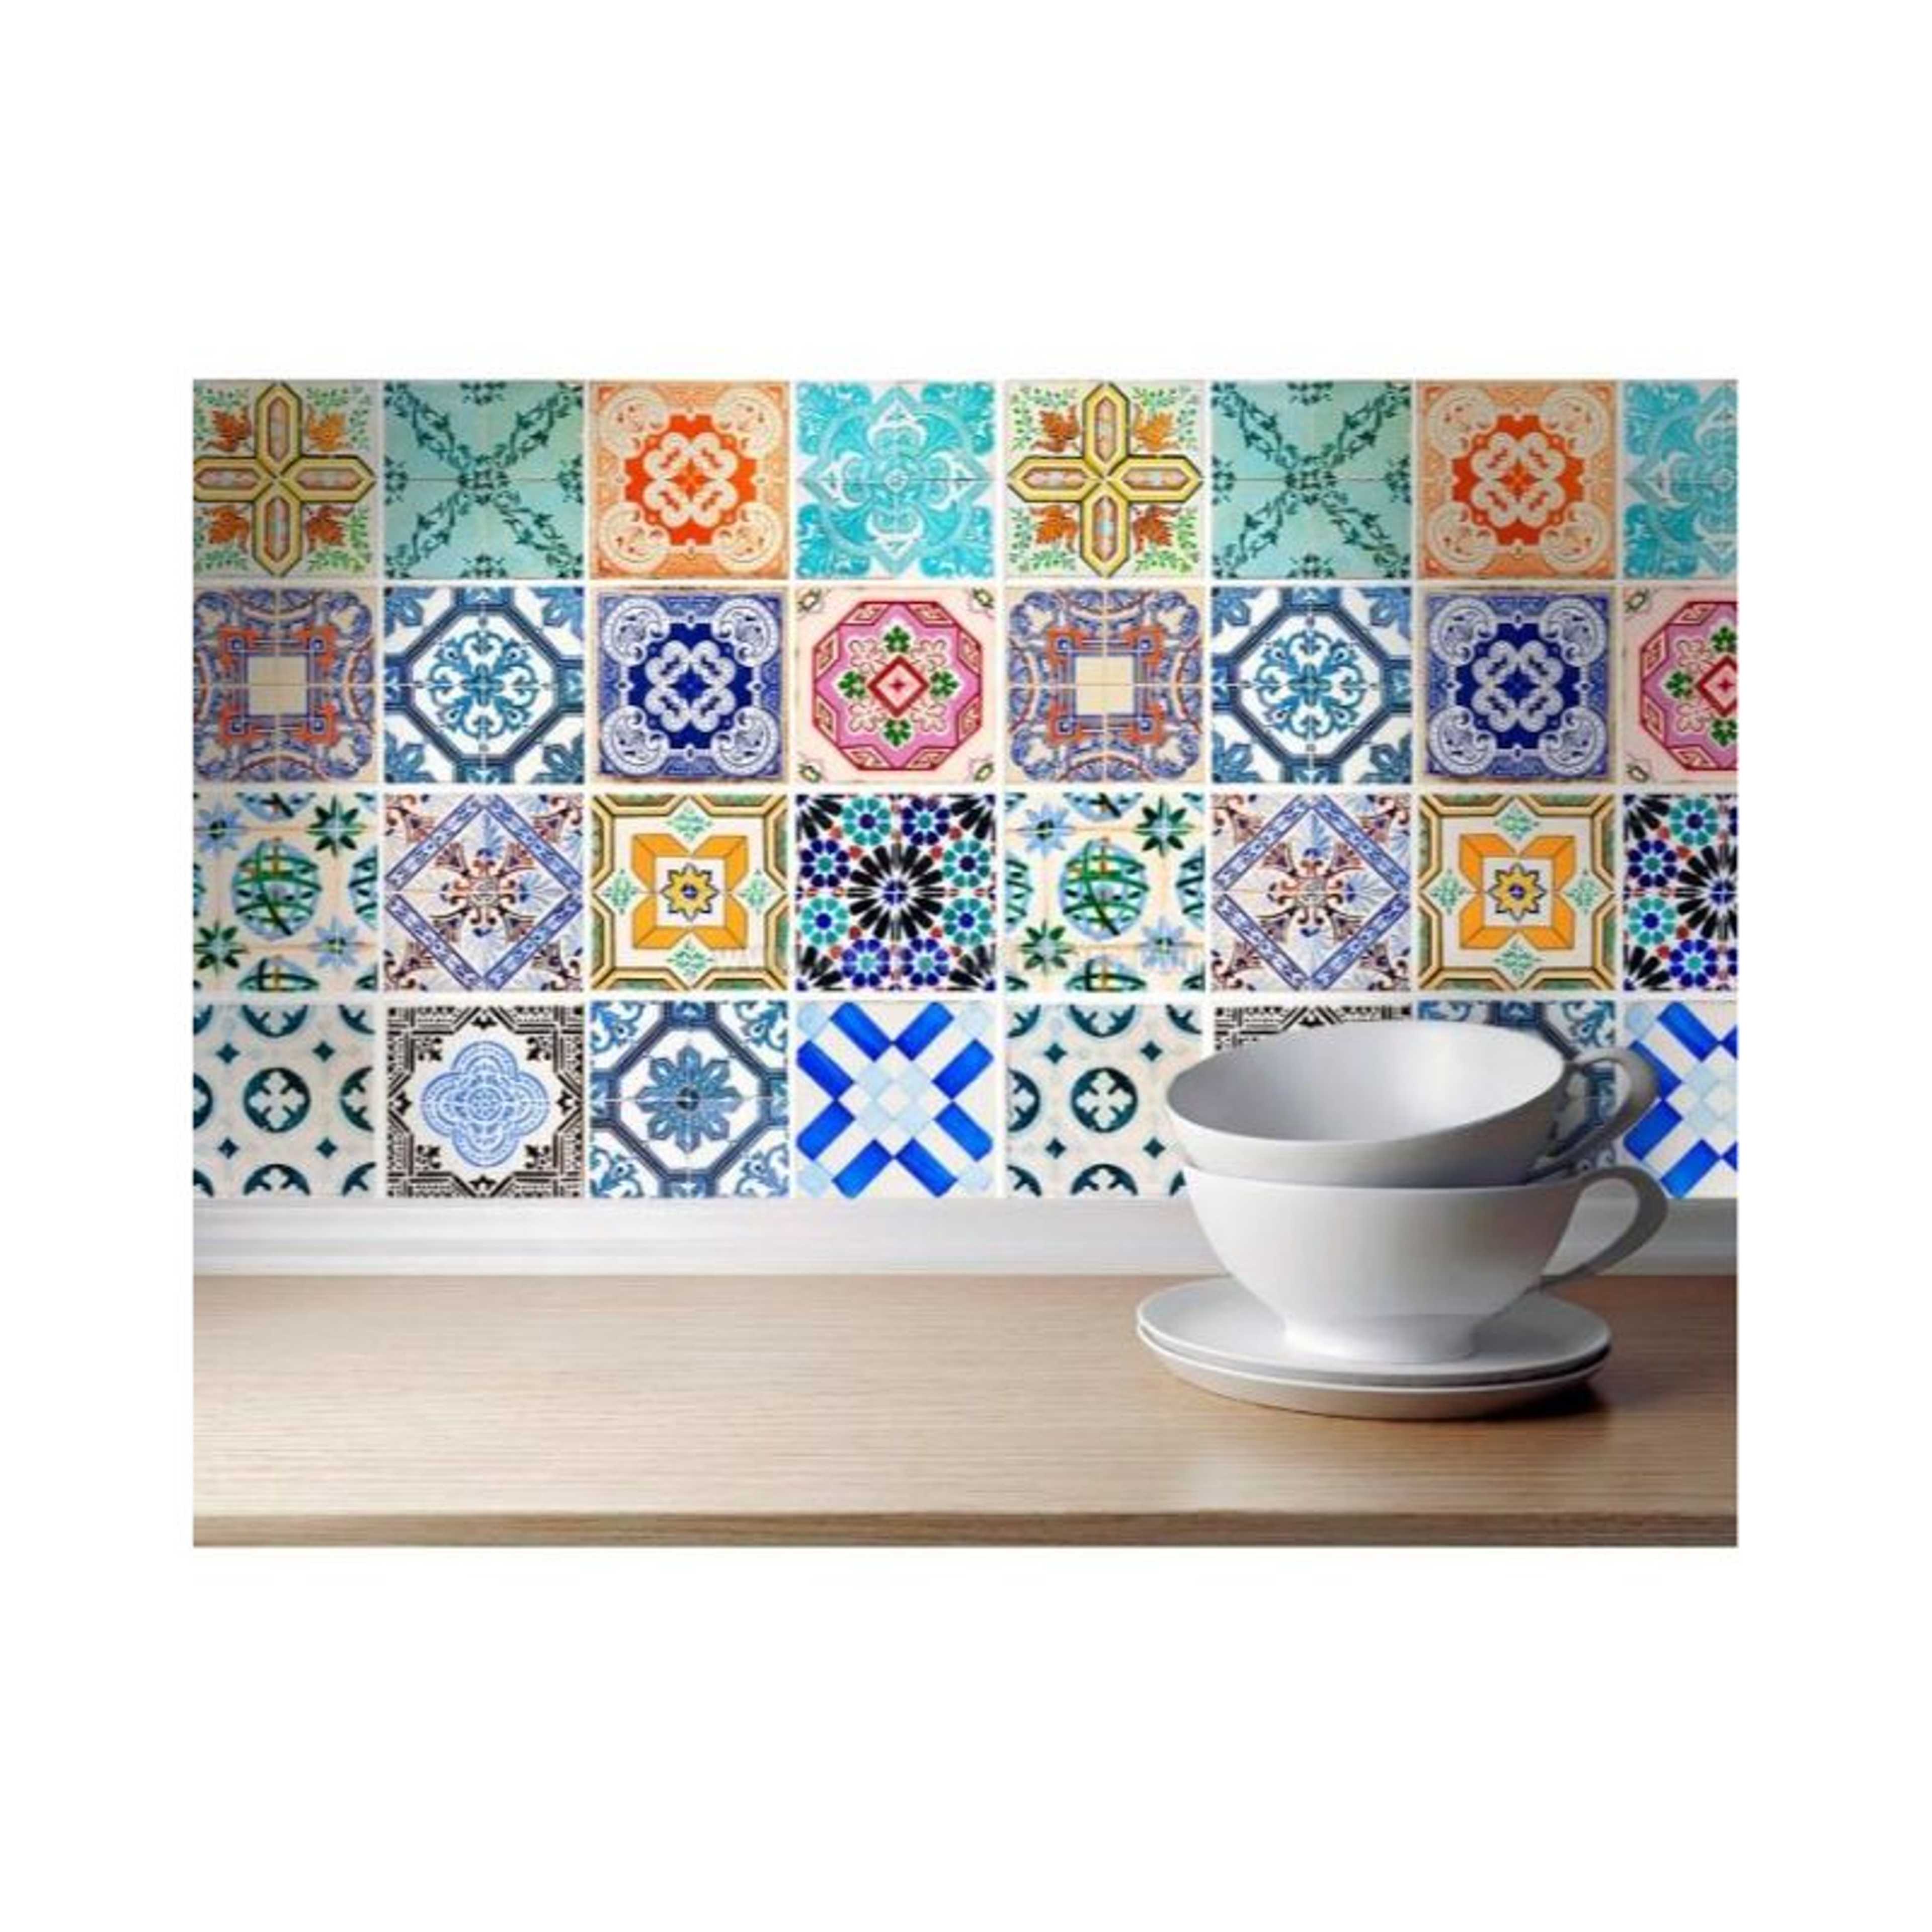 Pack Of 48 - Traditional Talavera Tiles Stickers For Bathroom & Kitchen